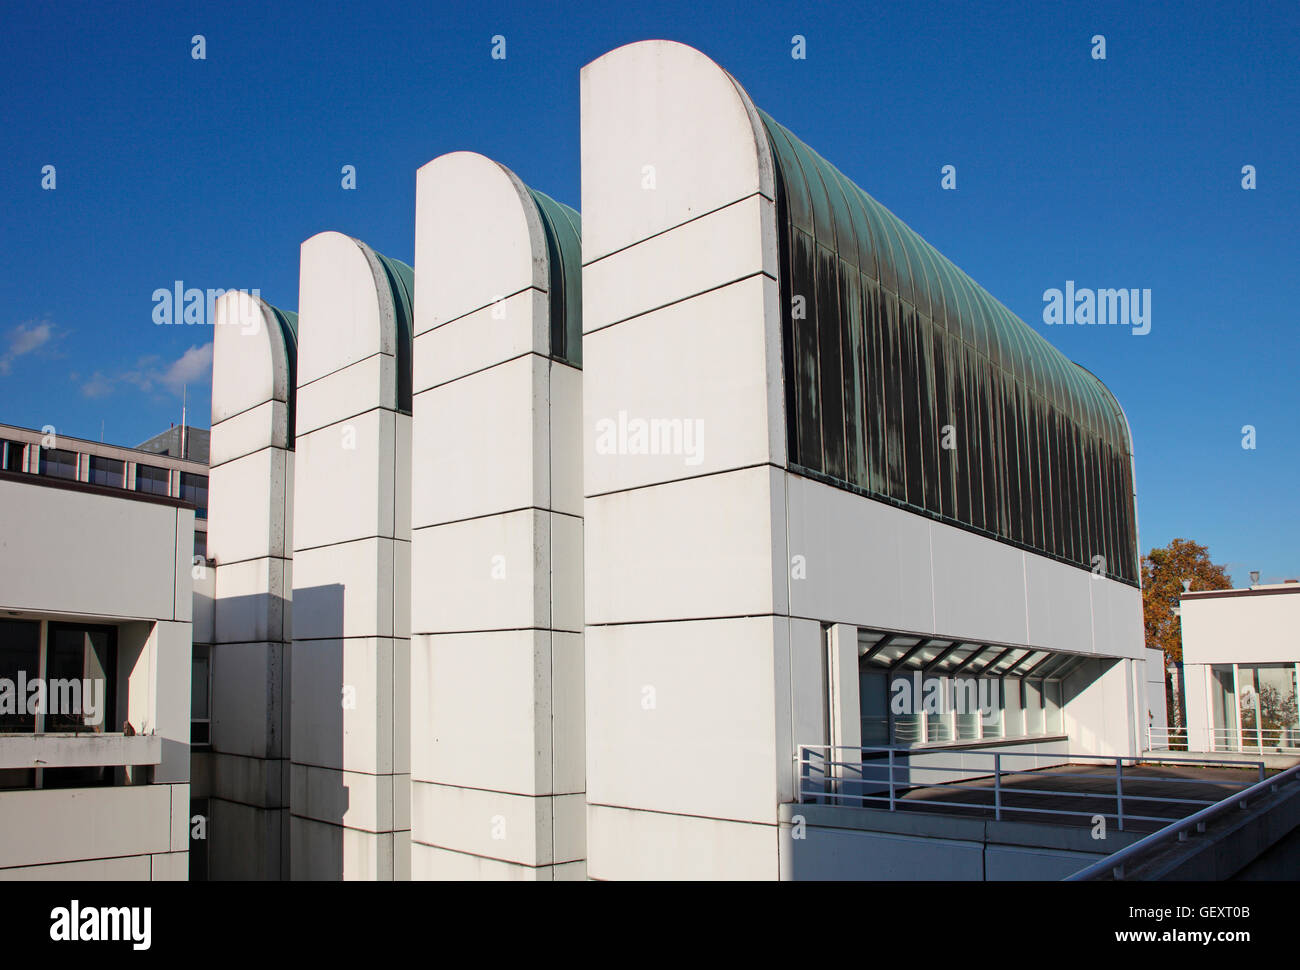 The Bauhaus Archive which was the last building designed by Walter Gropius before his death in 1969. Stock Photo